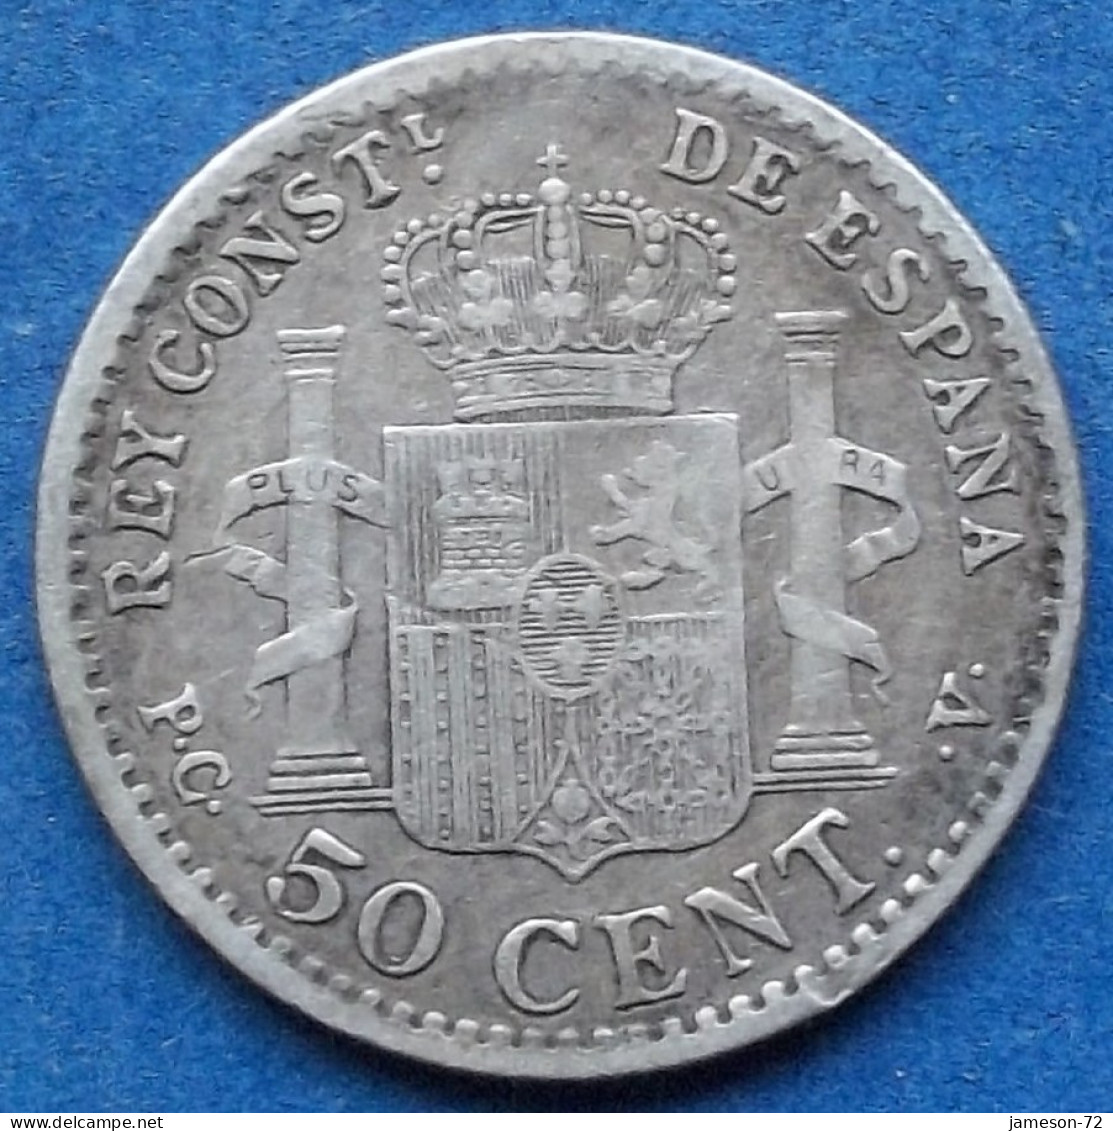 SPAIN - Silver 50 Centimos 1904 (10) PC V KM# 723 Alfonso XIII (1886-1931) - Edelweiss Coins - Premières Frappes